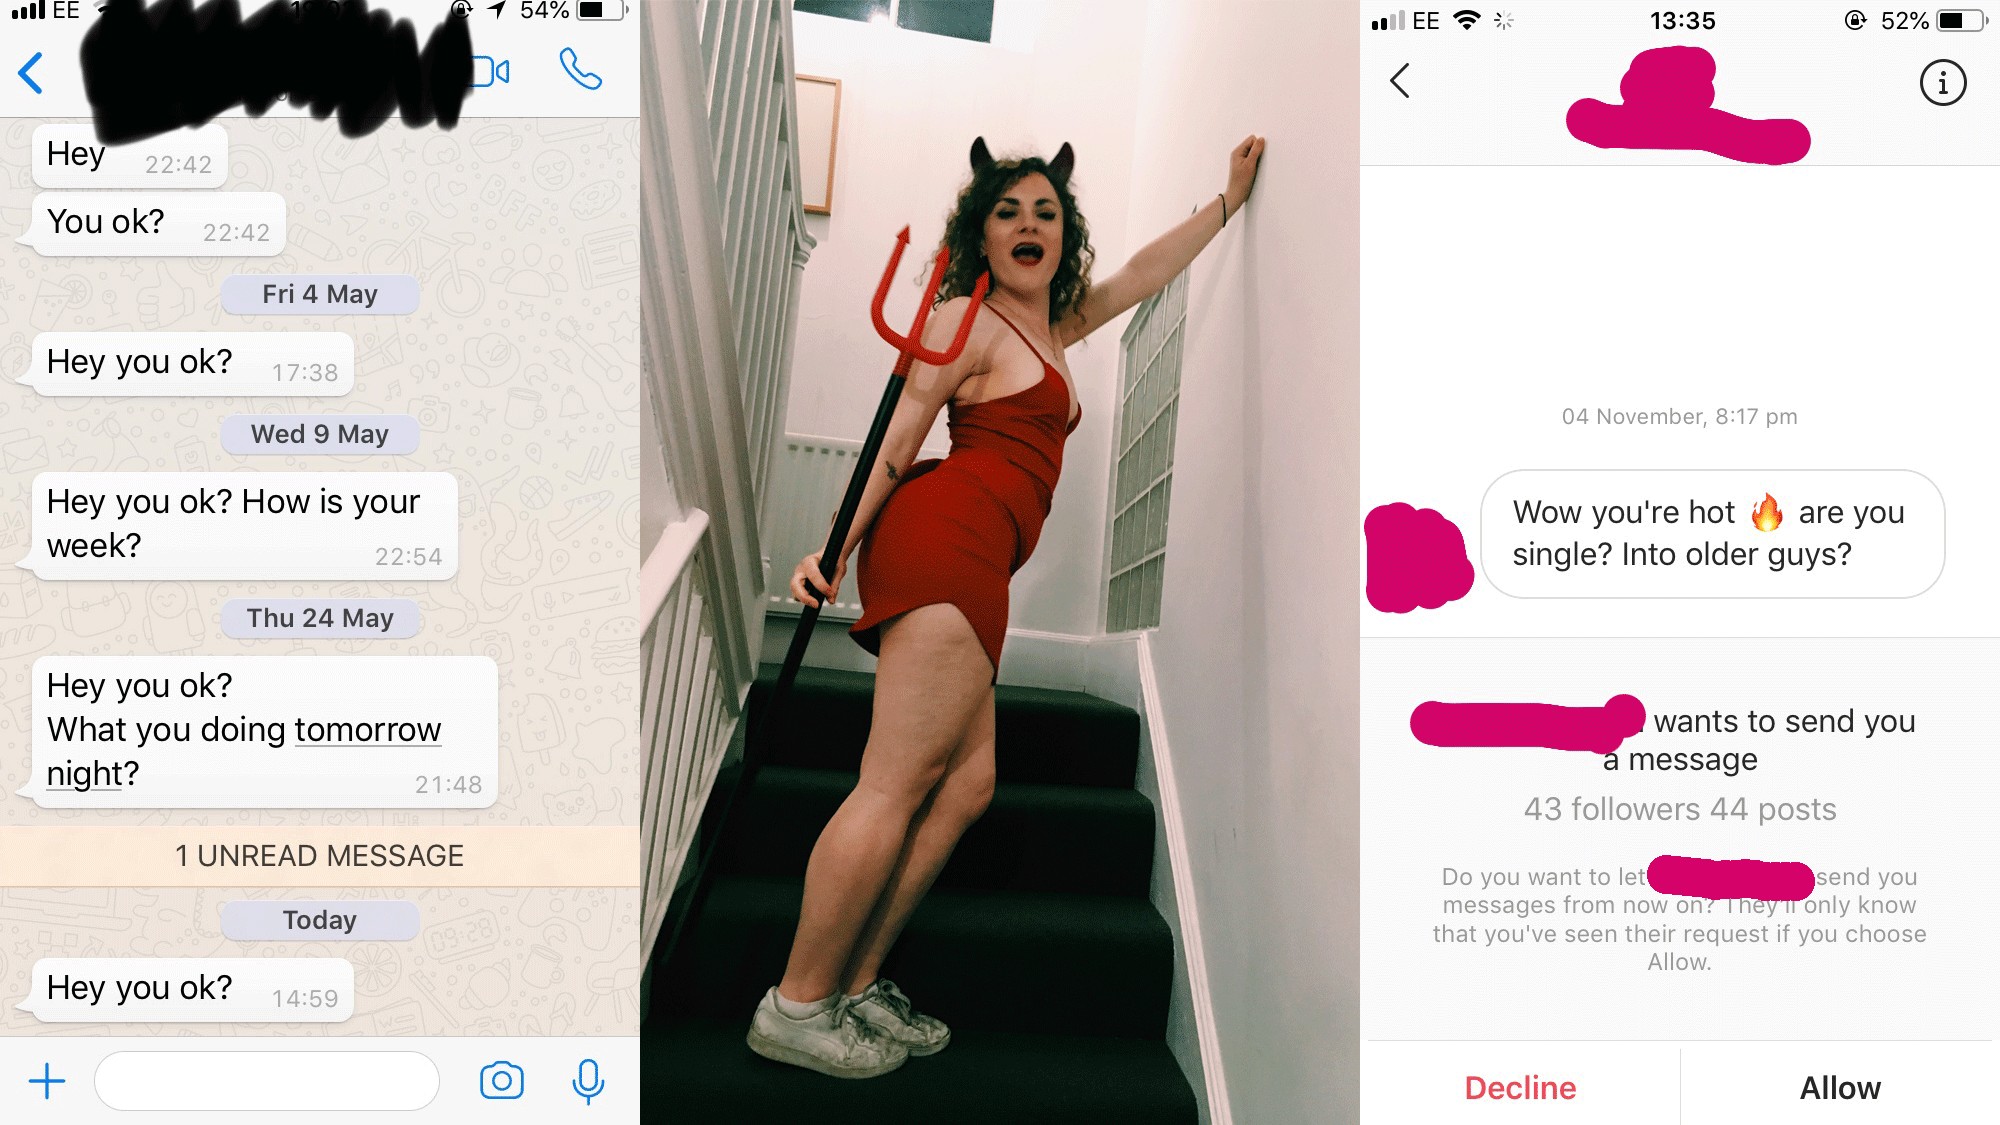 Relationships: How Are Dating Apps Affecting Our Connection With People?